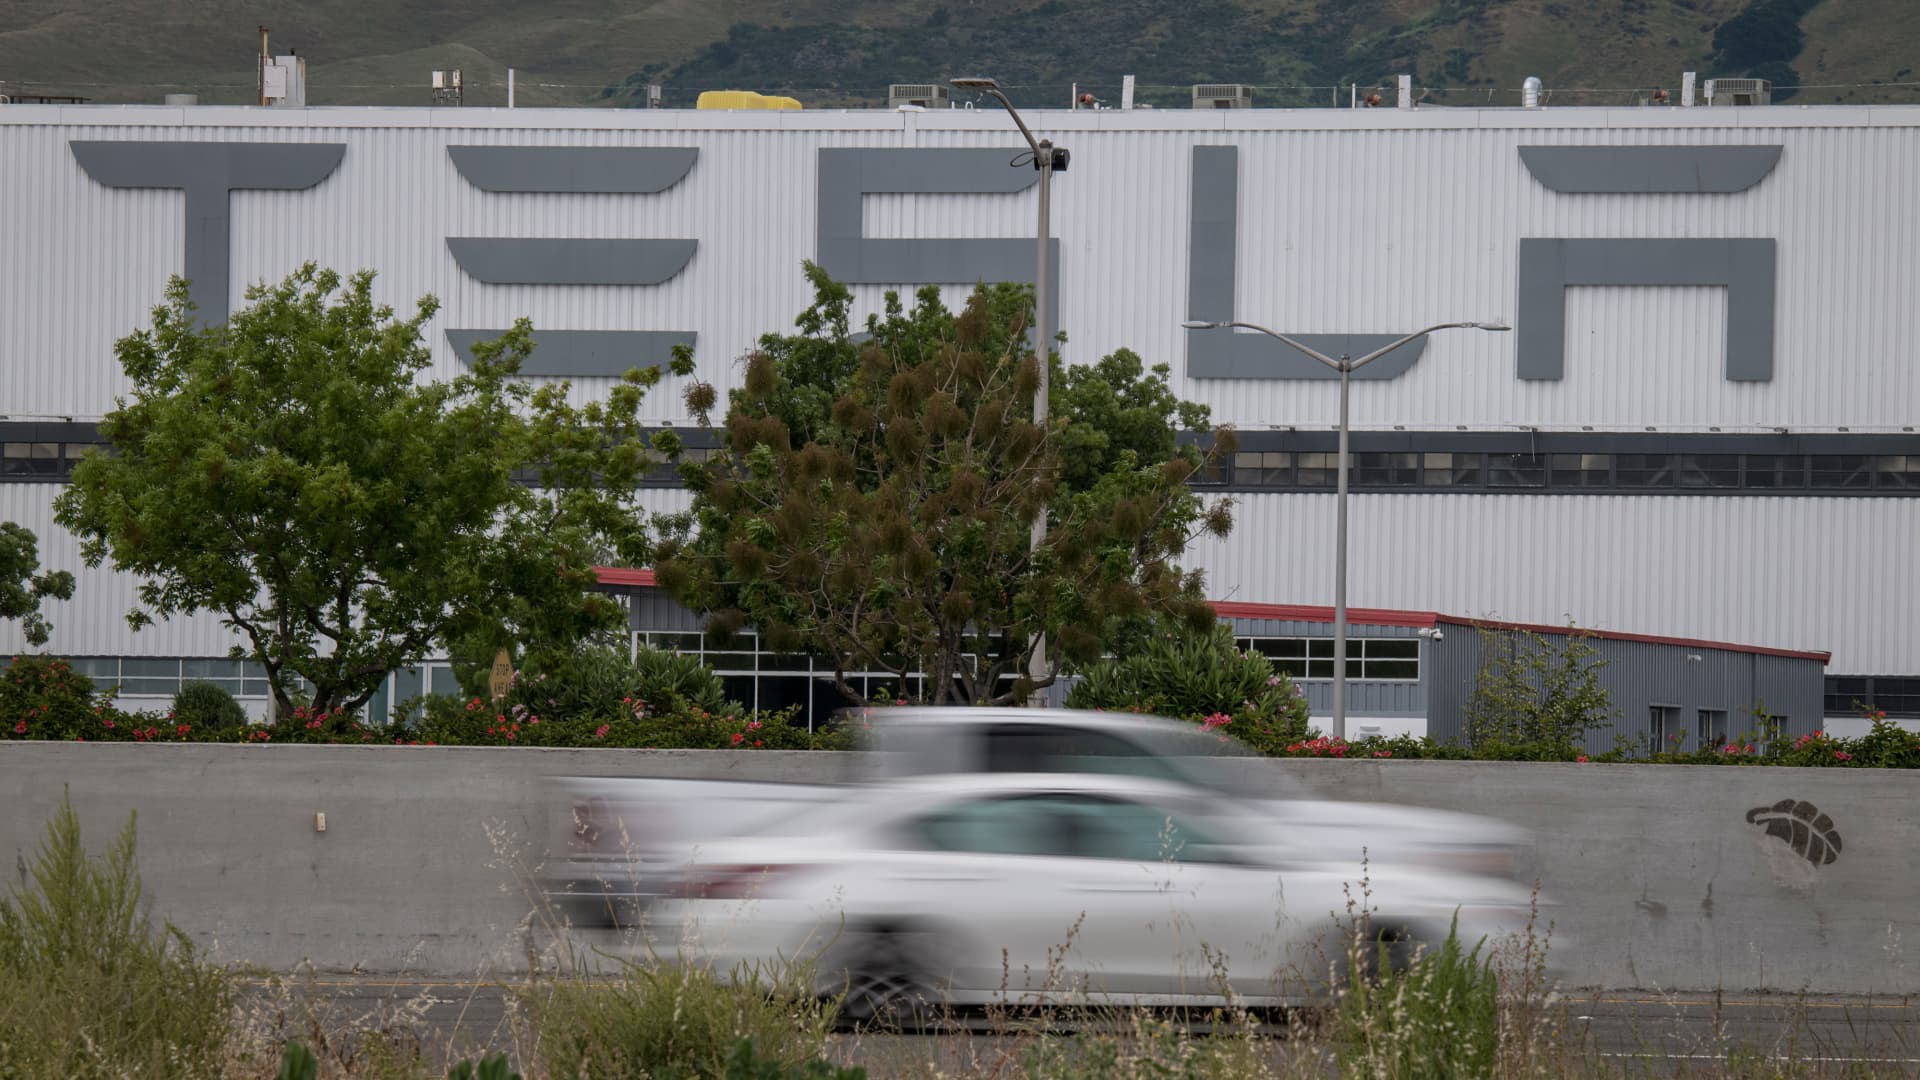 Tesla Fremont Factory Fire: What the Recent Blaze Means for the Future of Tesla's First Plant